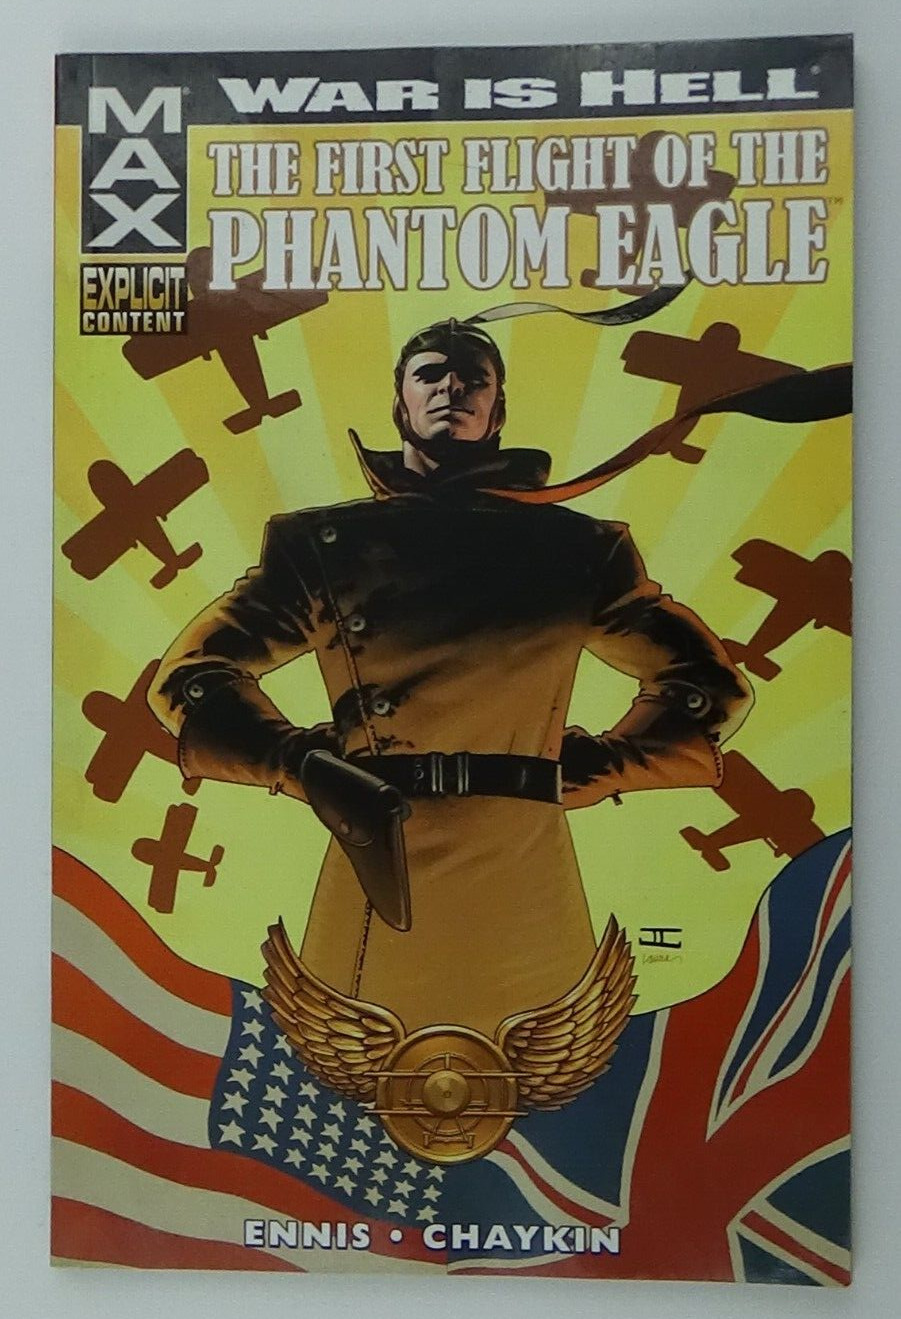 War Is Hell: The First Flight of the Phantom Eagle (Marvel, 2009) Paperback #07